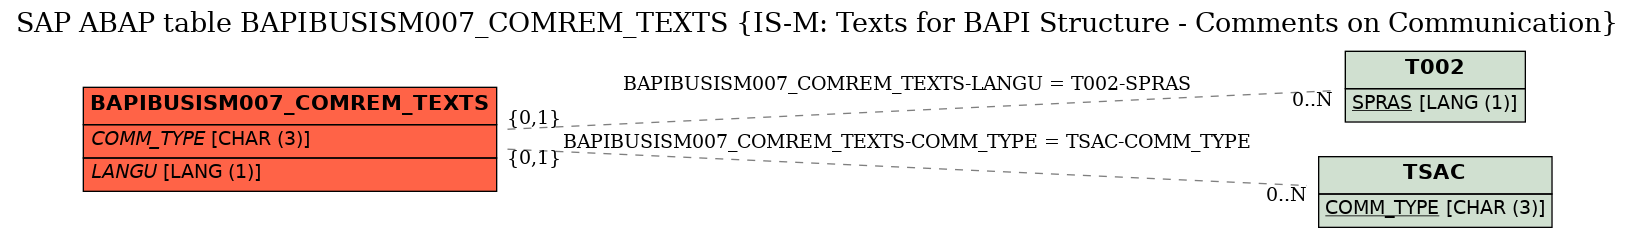 E-R Diagram for table BAPIBUSISM007_COMREM_TEXTS (IS-M: Texts for BAPI Structure - Comments on Communication)